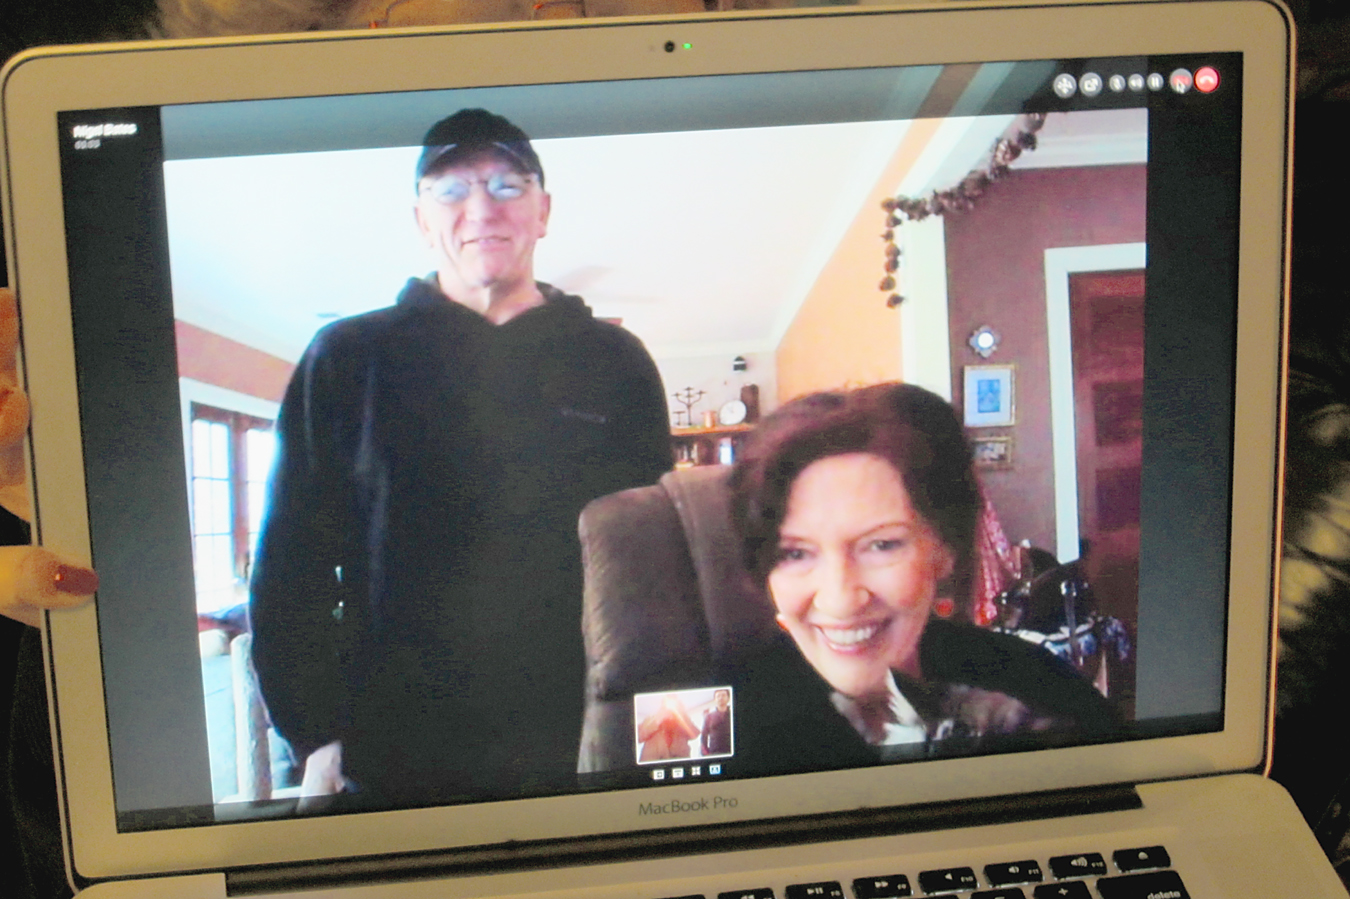 Julie Wiley and Nigel Bates, Skyping from Napa (2011).